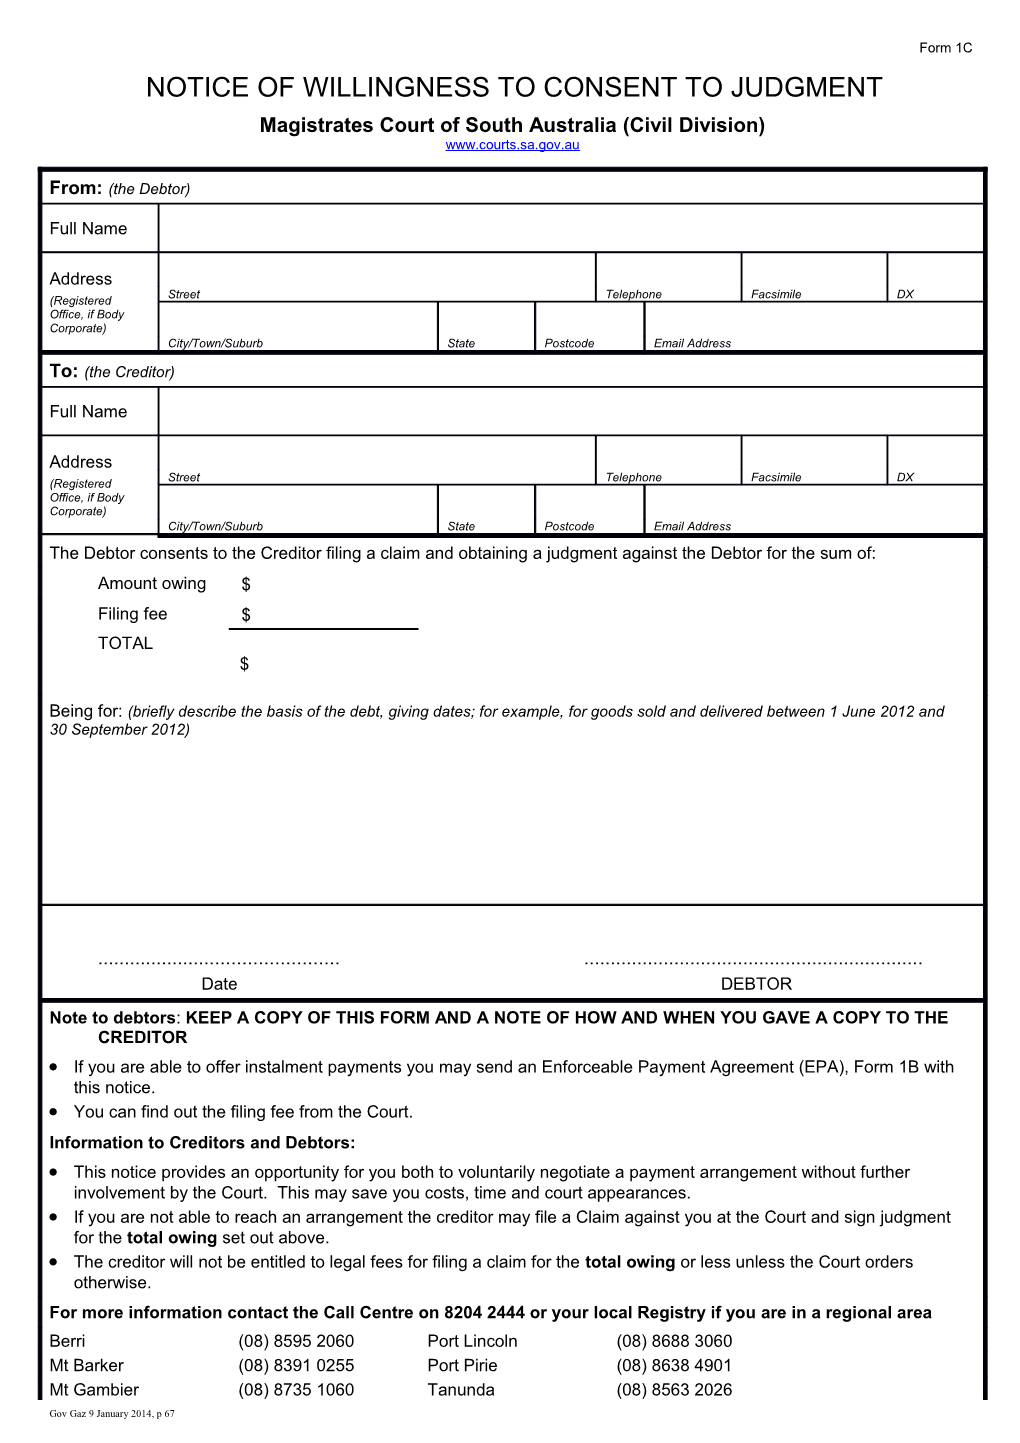 Form 1C - Notice of Willingness to Consent to Judgment